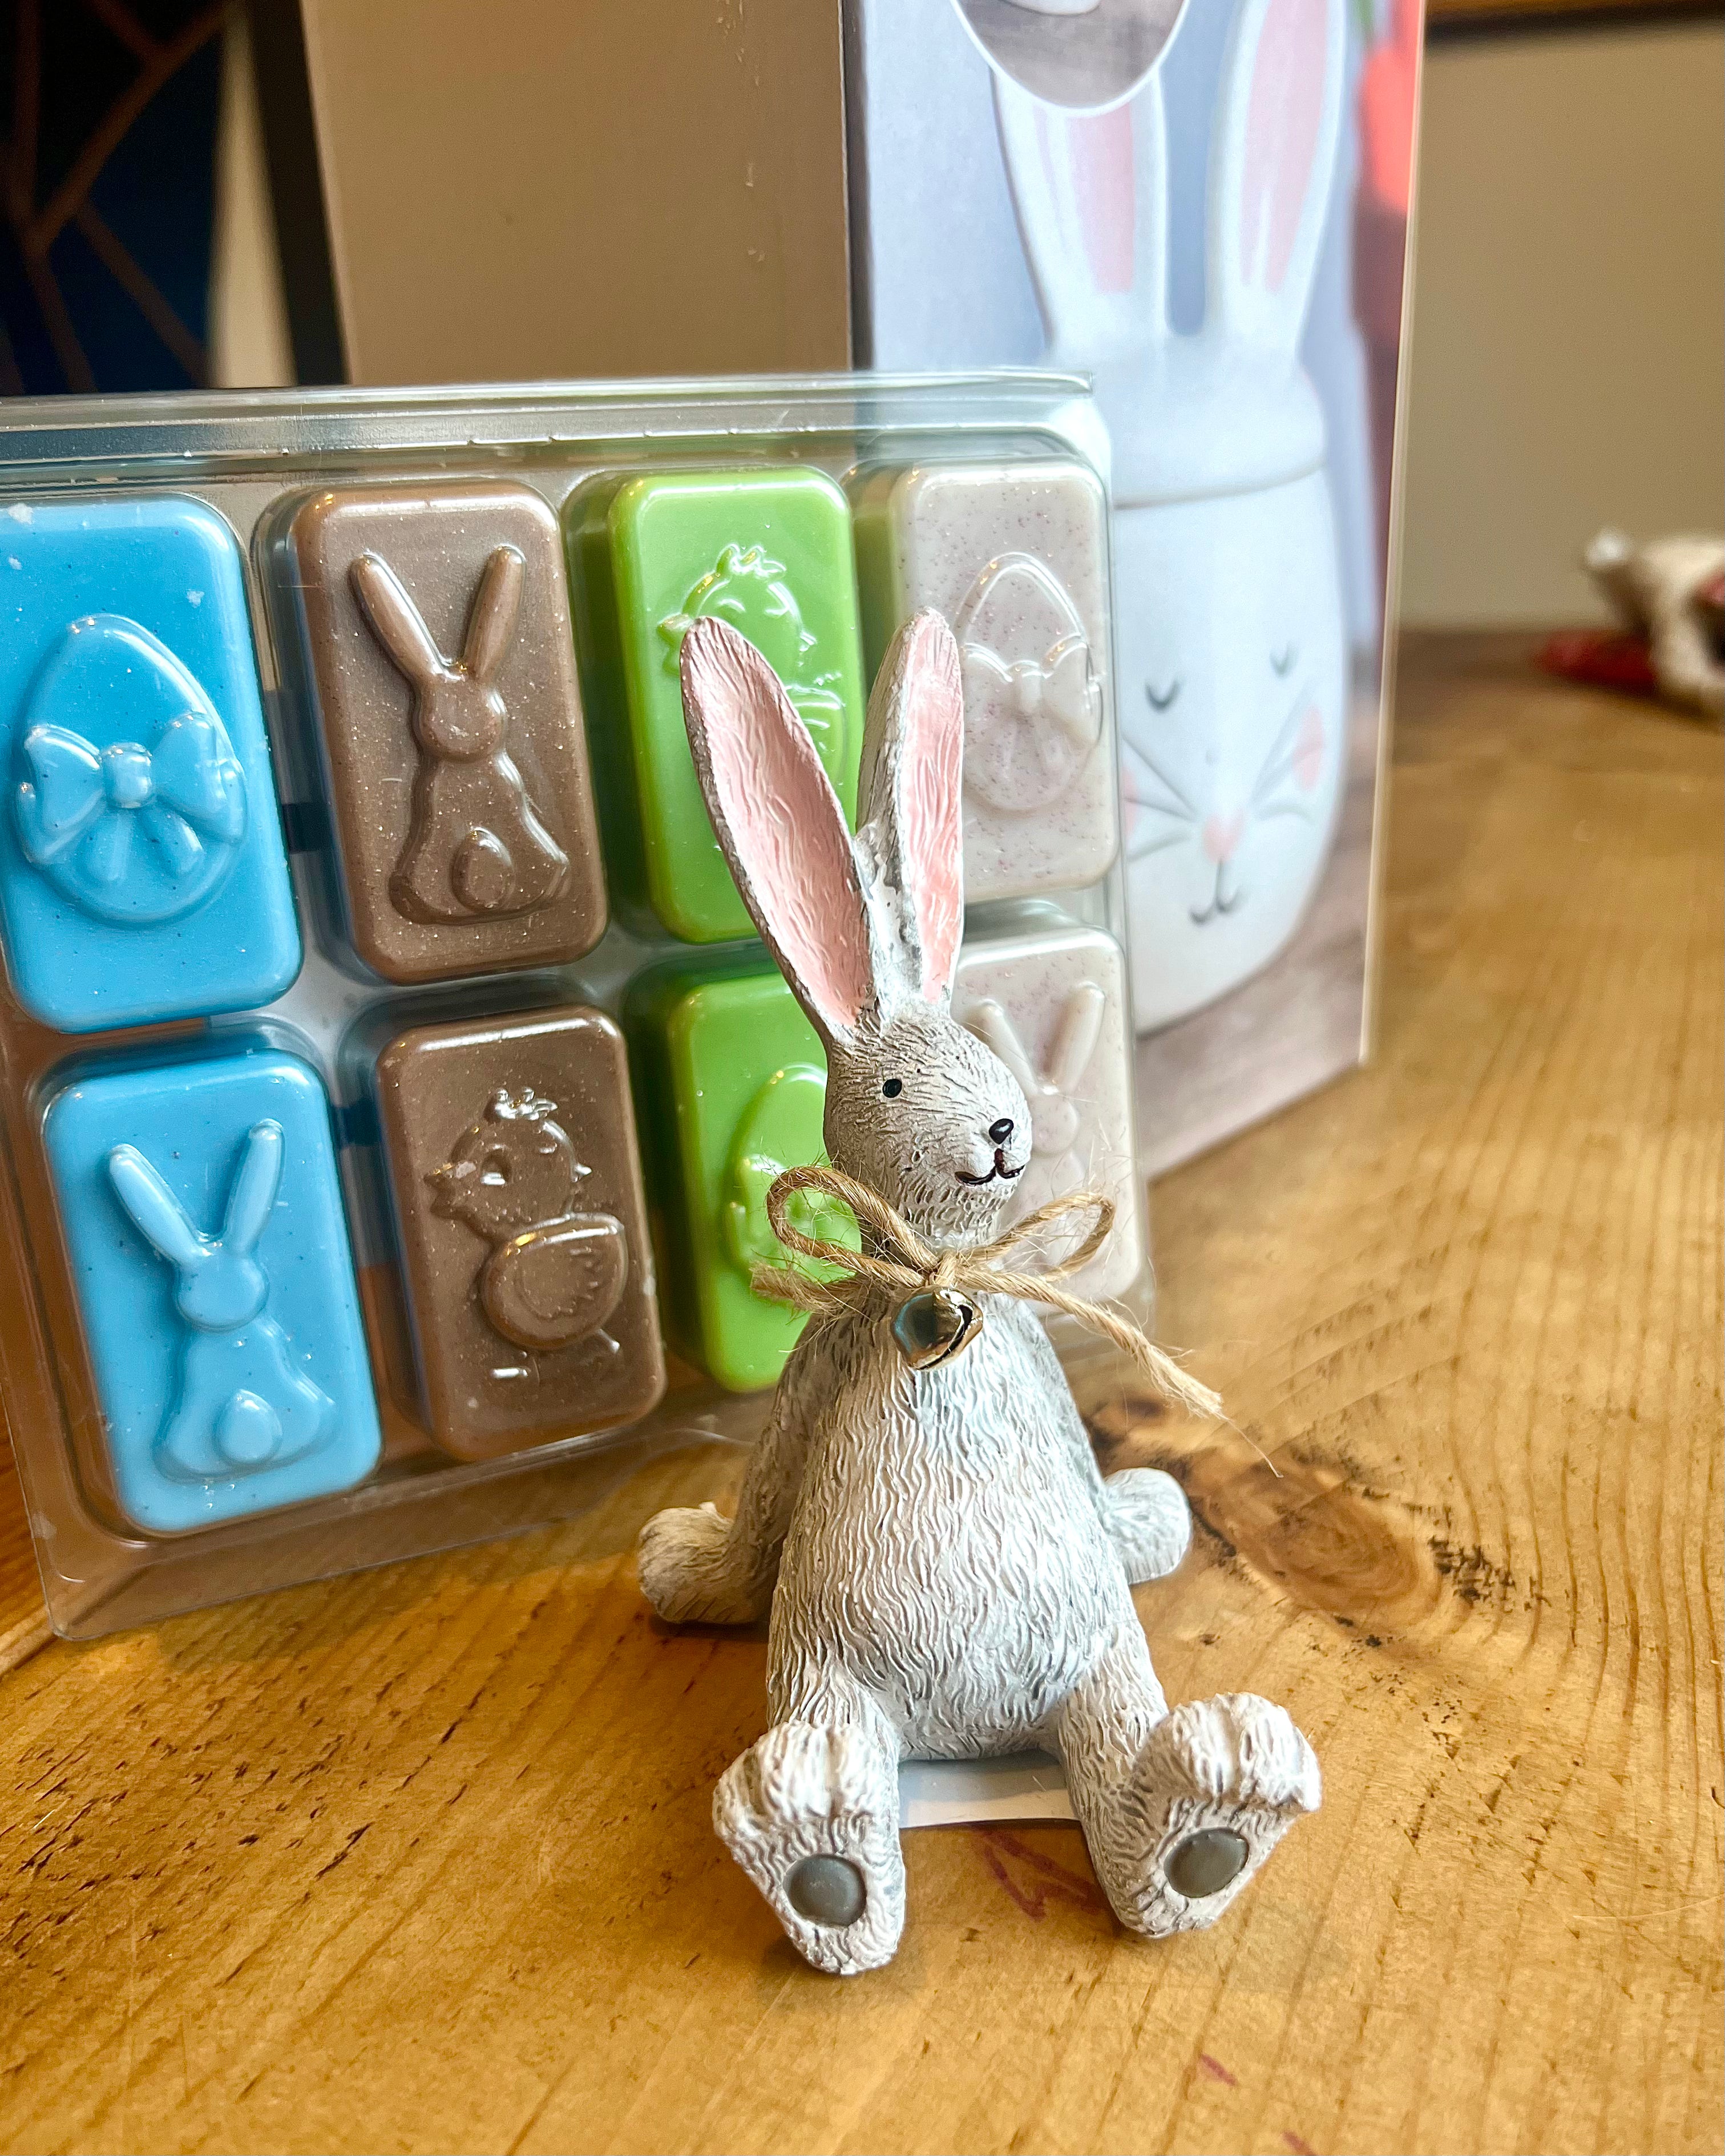 Easter Bunny Ornament